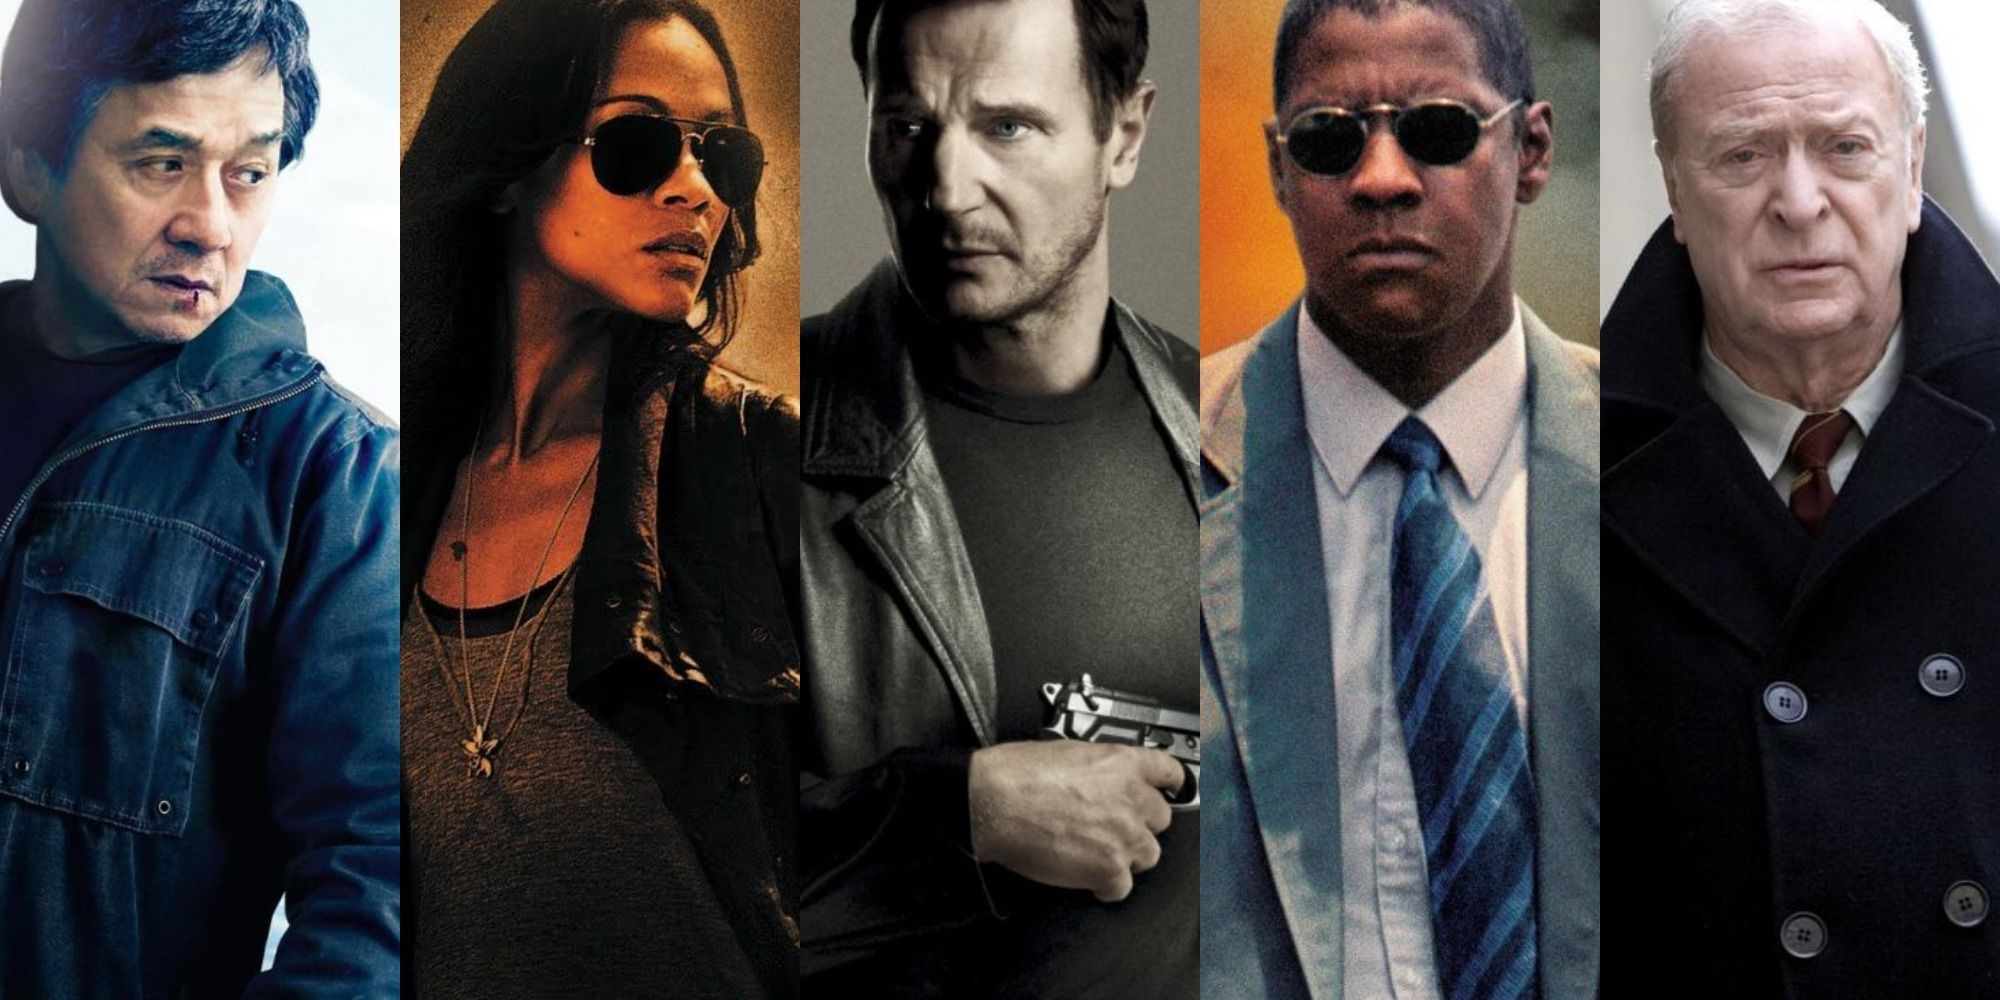 15 ActionThrillers To Watch If You Love The Taken Movies